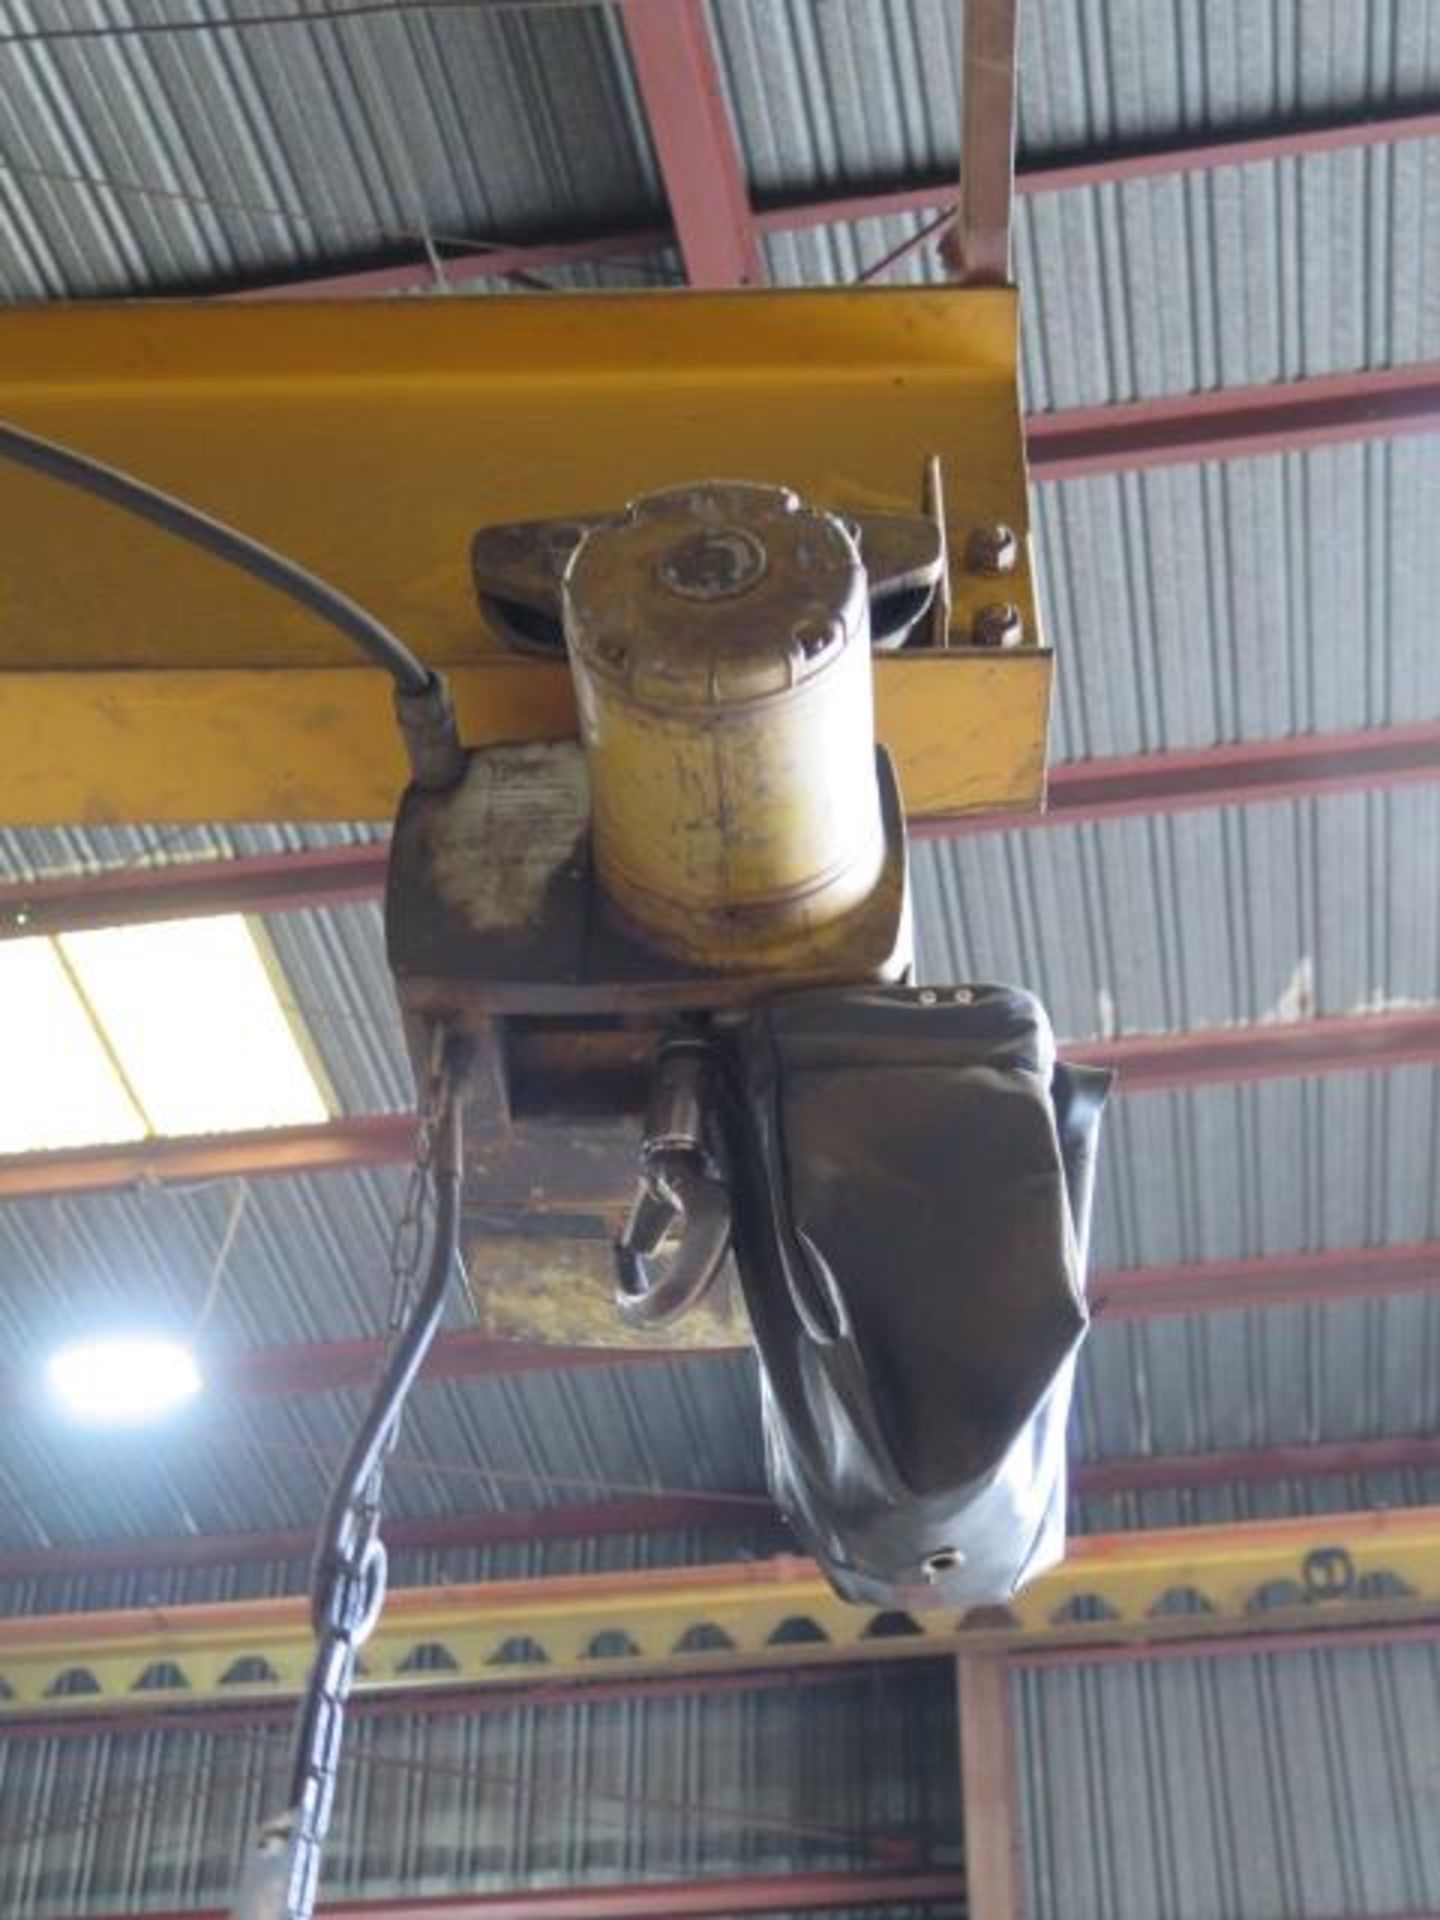 Abell-Howe 1 Ton Floor Mounted Jib Crane w/ Electric Hoist (SOLD AS-IS - NO WARRANTY) - Image 5 of 7